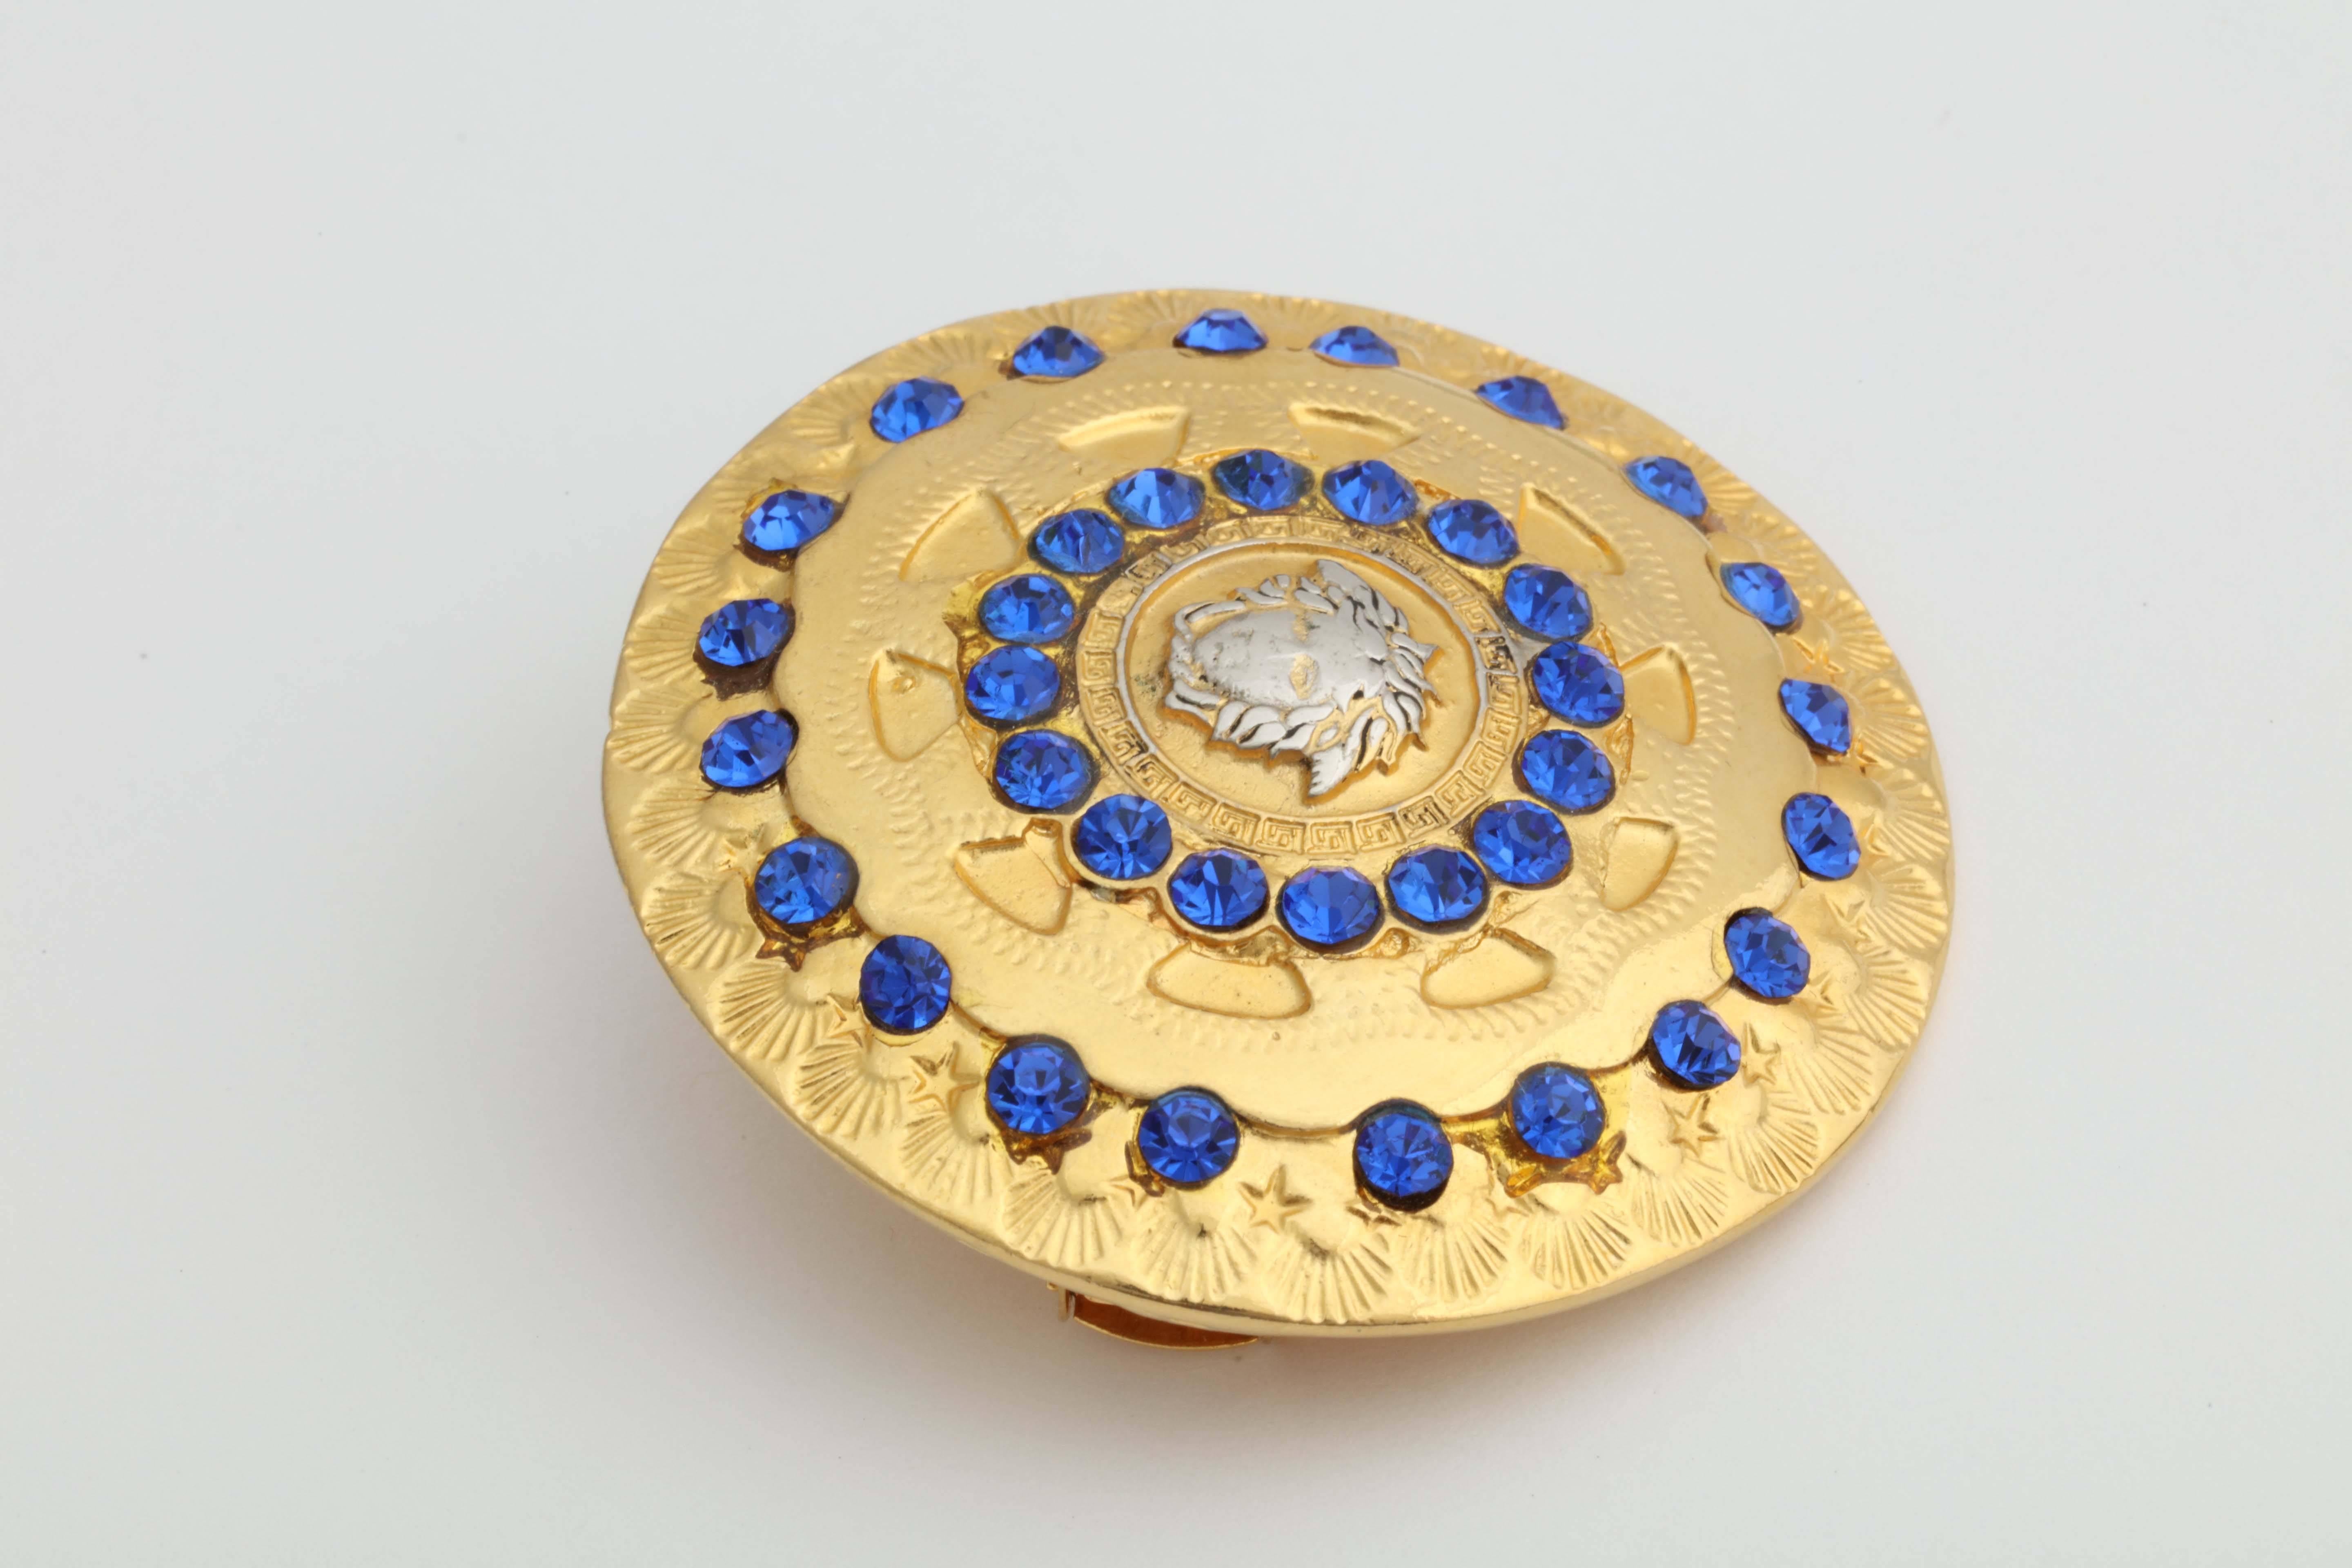 Gianni Versace gold Medusa hair pin with blue rhinestones.
Width 2 inches